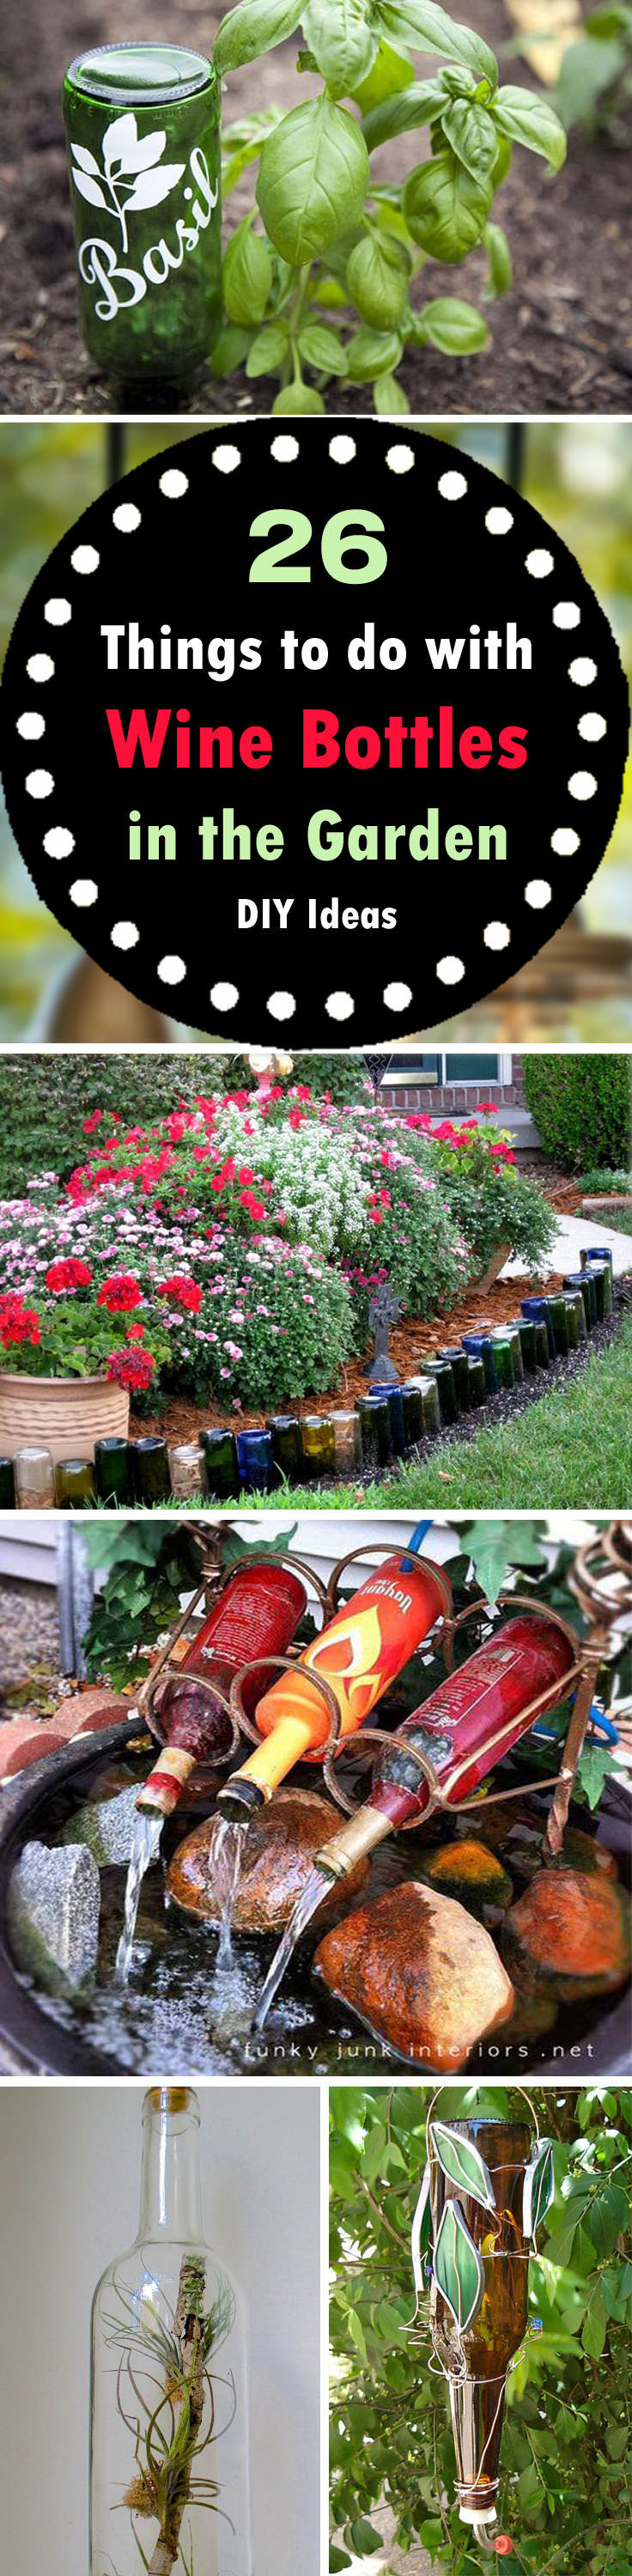 16 Fashionable Wine Bottle Vase Diy 2024 free download wine bottle vase diy of diy wine bottle ideas for the garden 26 wine bottle uses balcony intended for if you have got empty wine bottles in your home then these 26 diy wine bottle